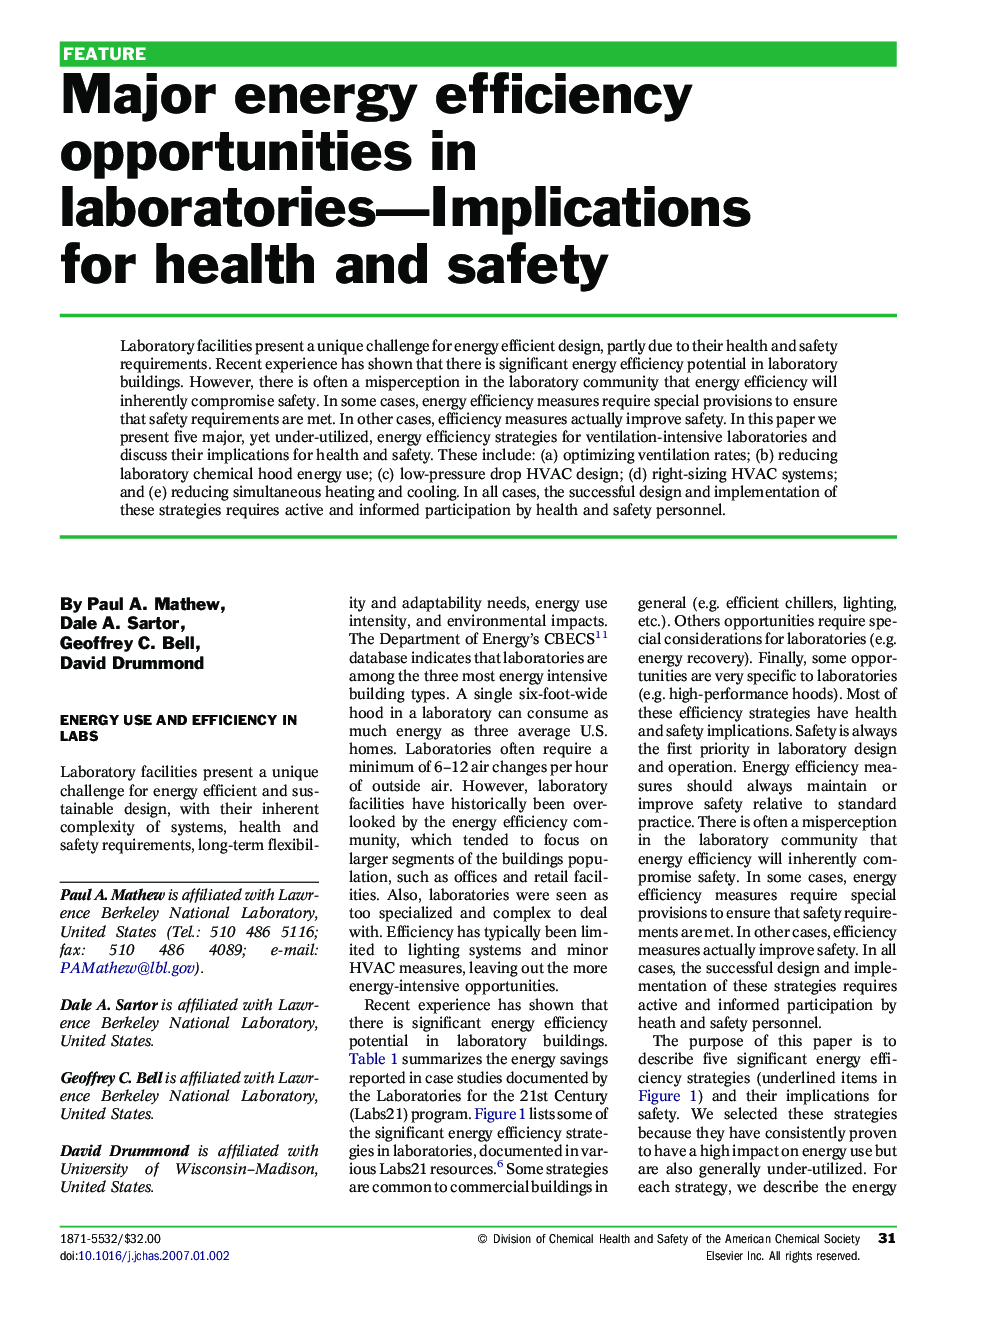 Major energy efficiency opportunities in laboratories—Implications for health and safety